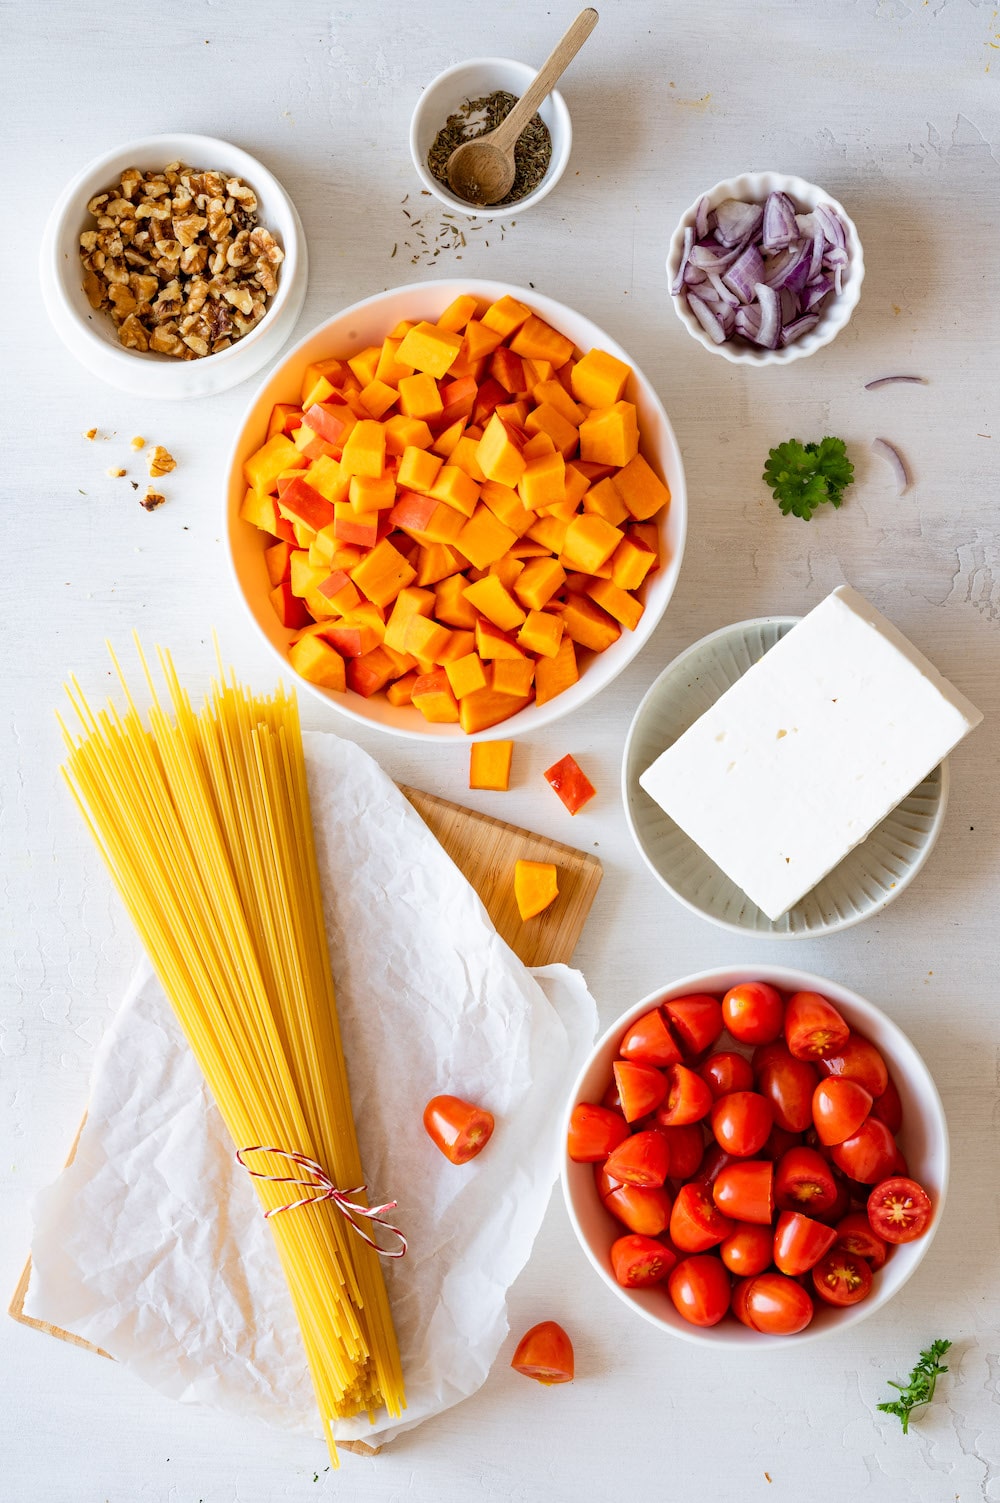 Overhead image of ingredients for the kabocha squash pasta: Spaghetti pasta, kabocha squash, tomatoes, feta, red onions, walnuts and thyme.